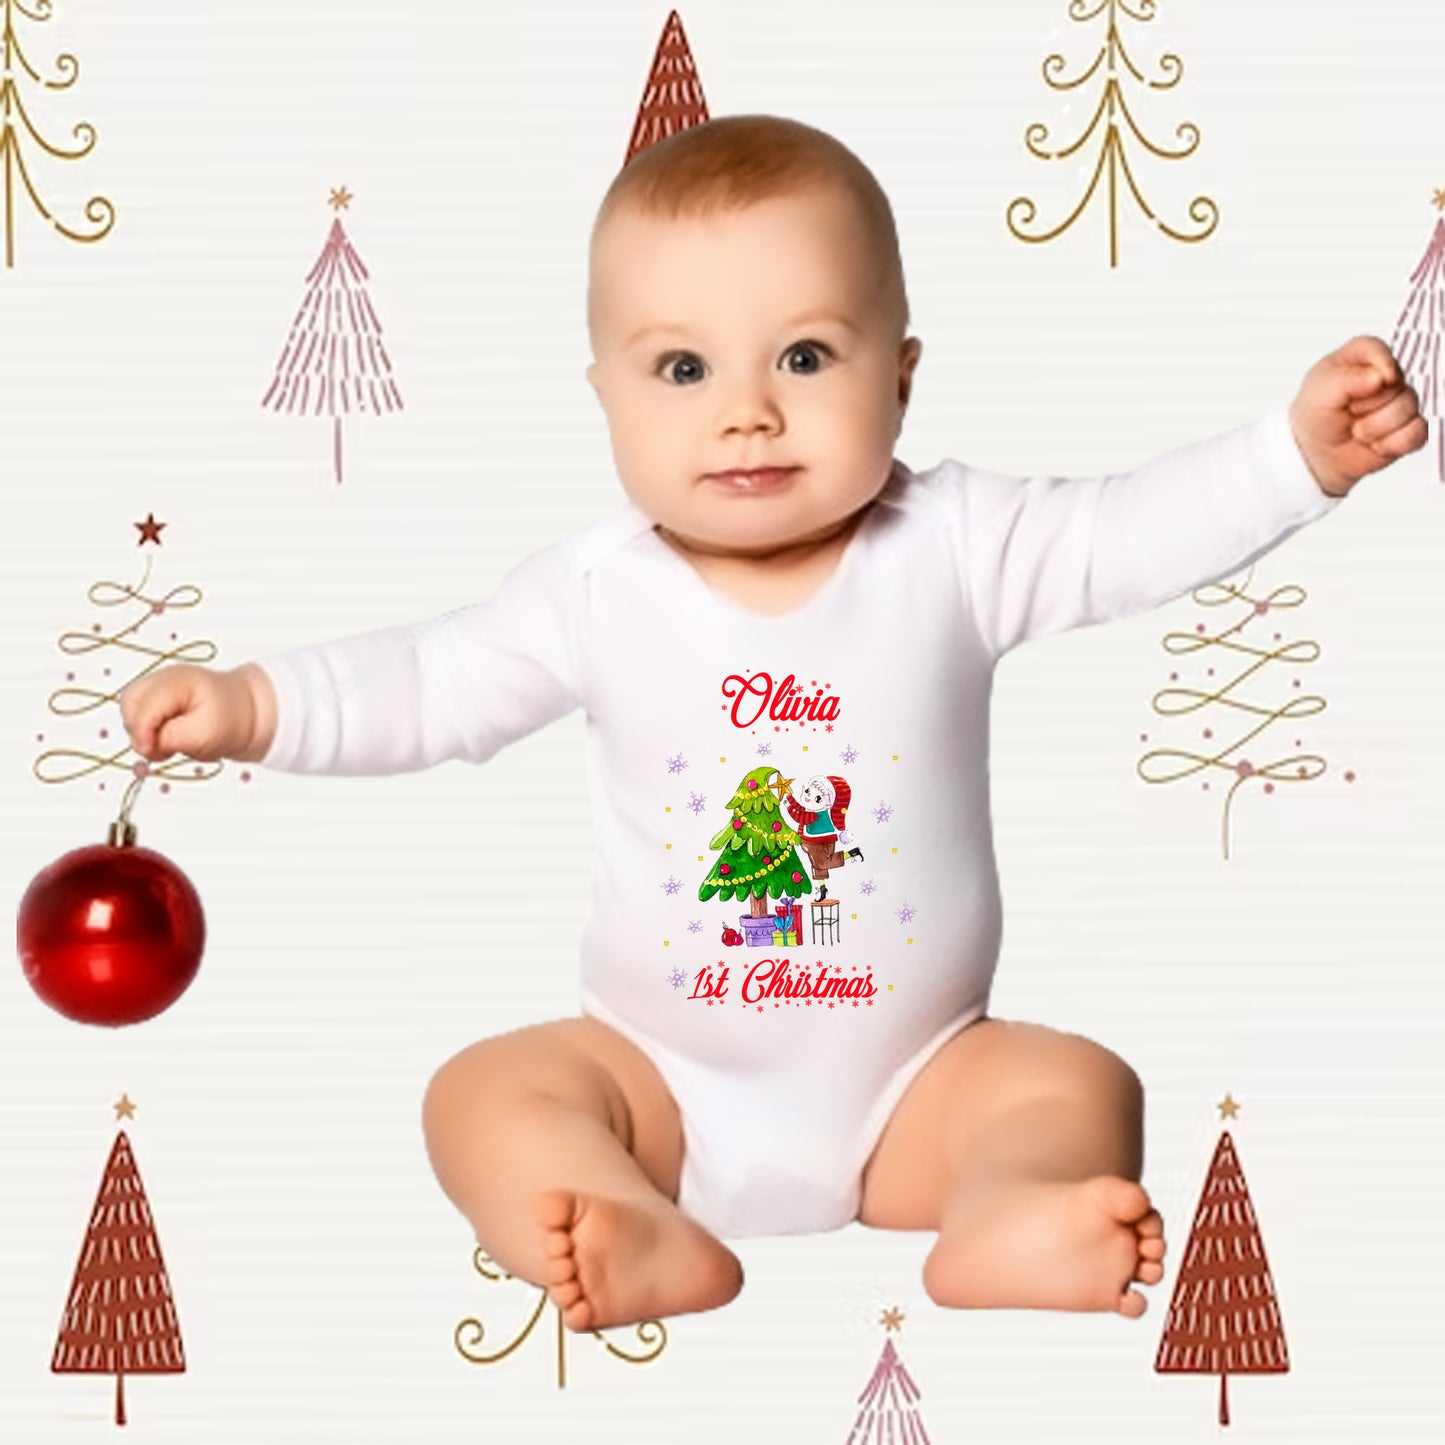 Customized Baby's First Christmas Sleepsuit